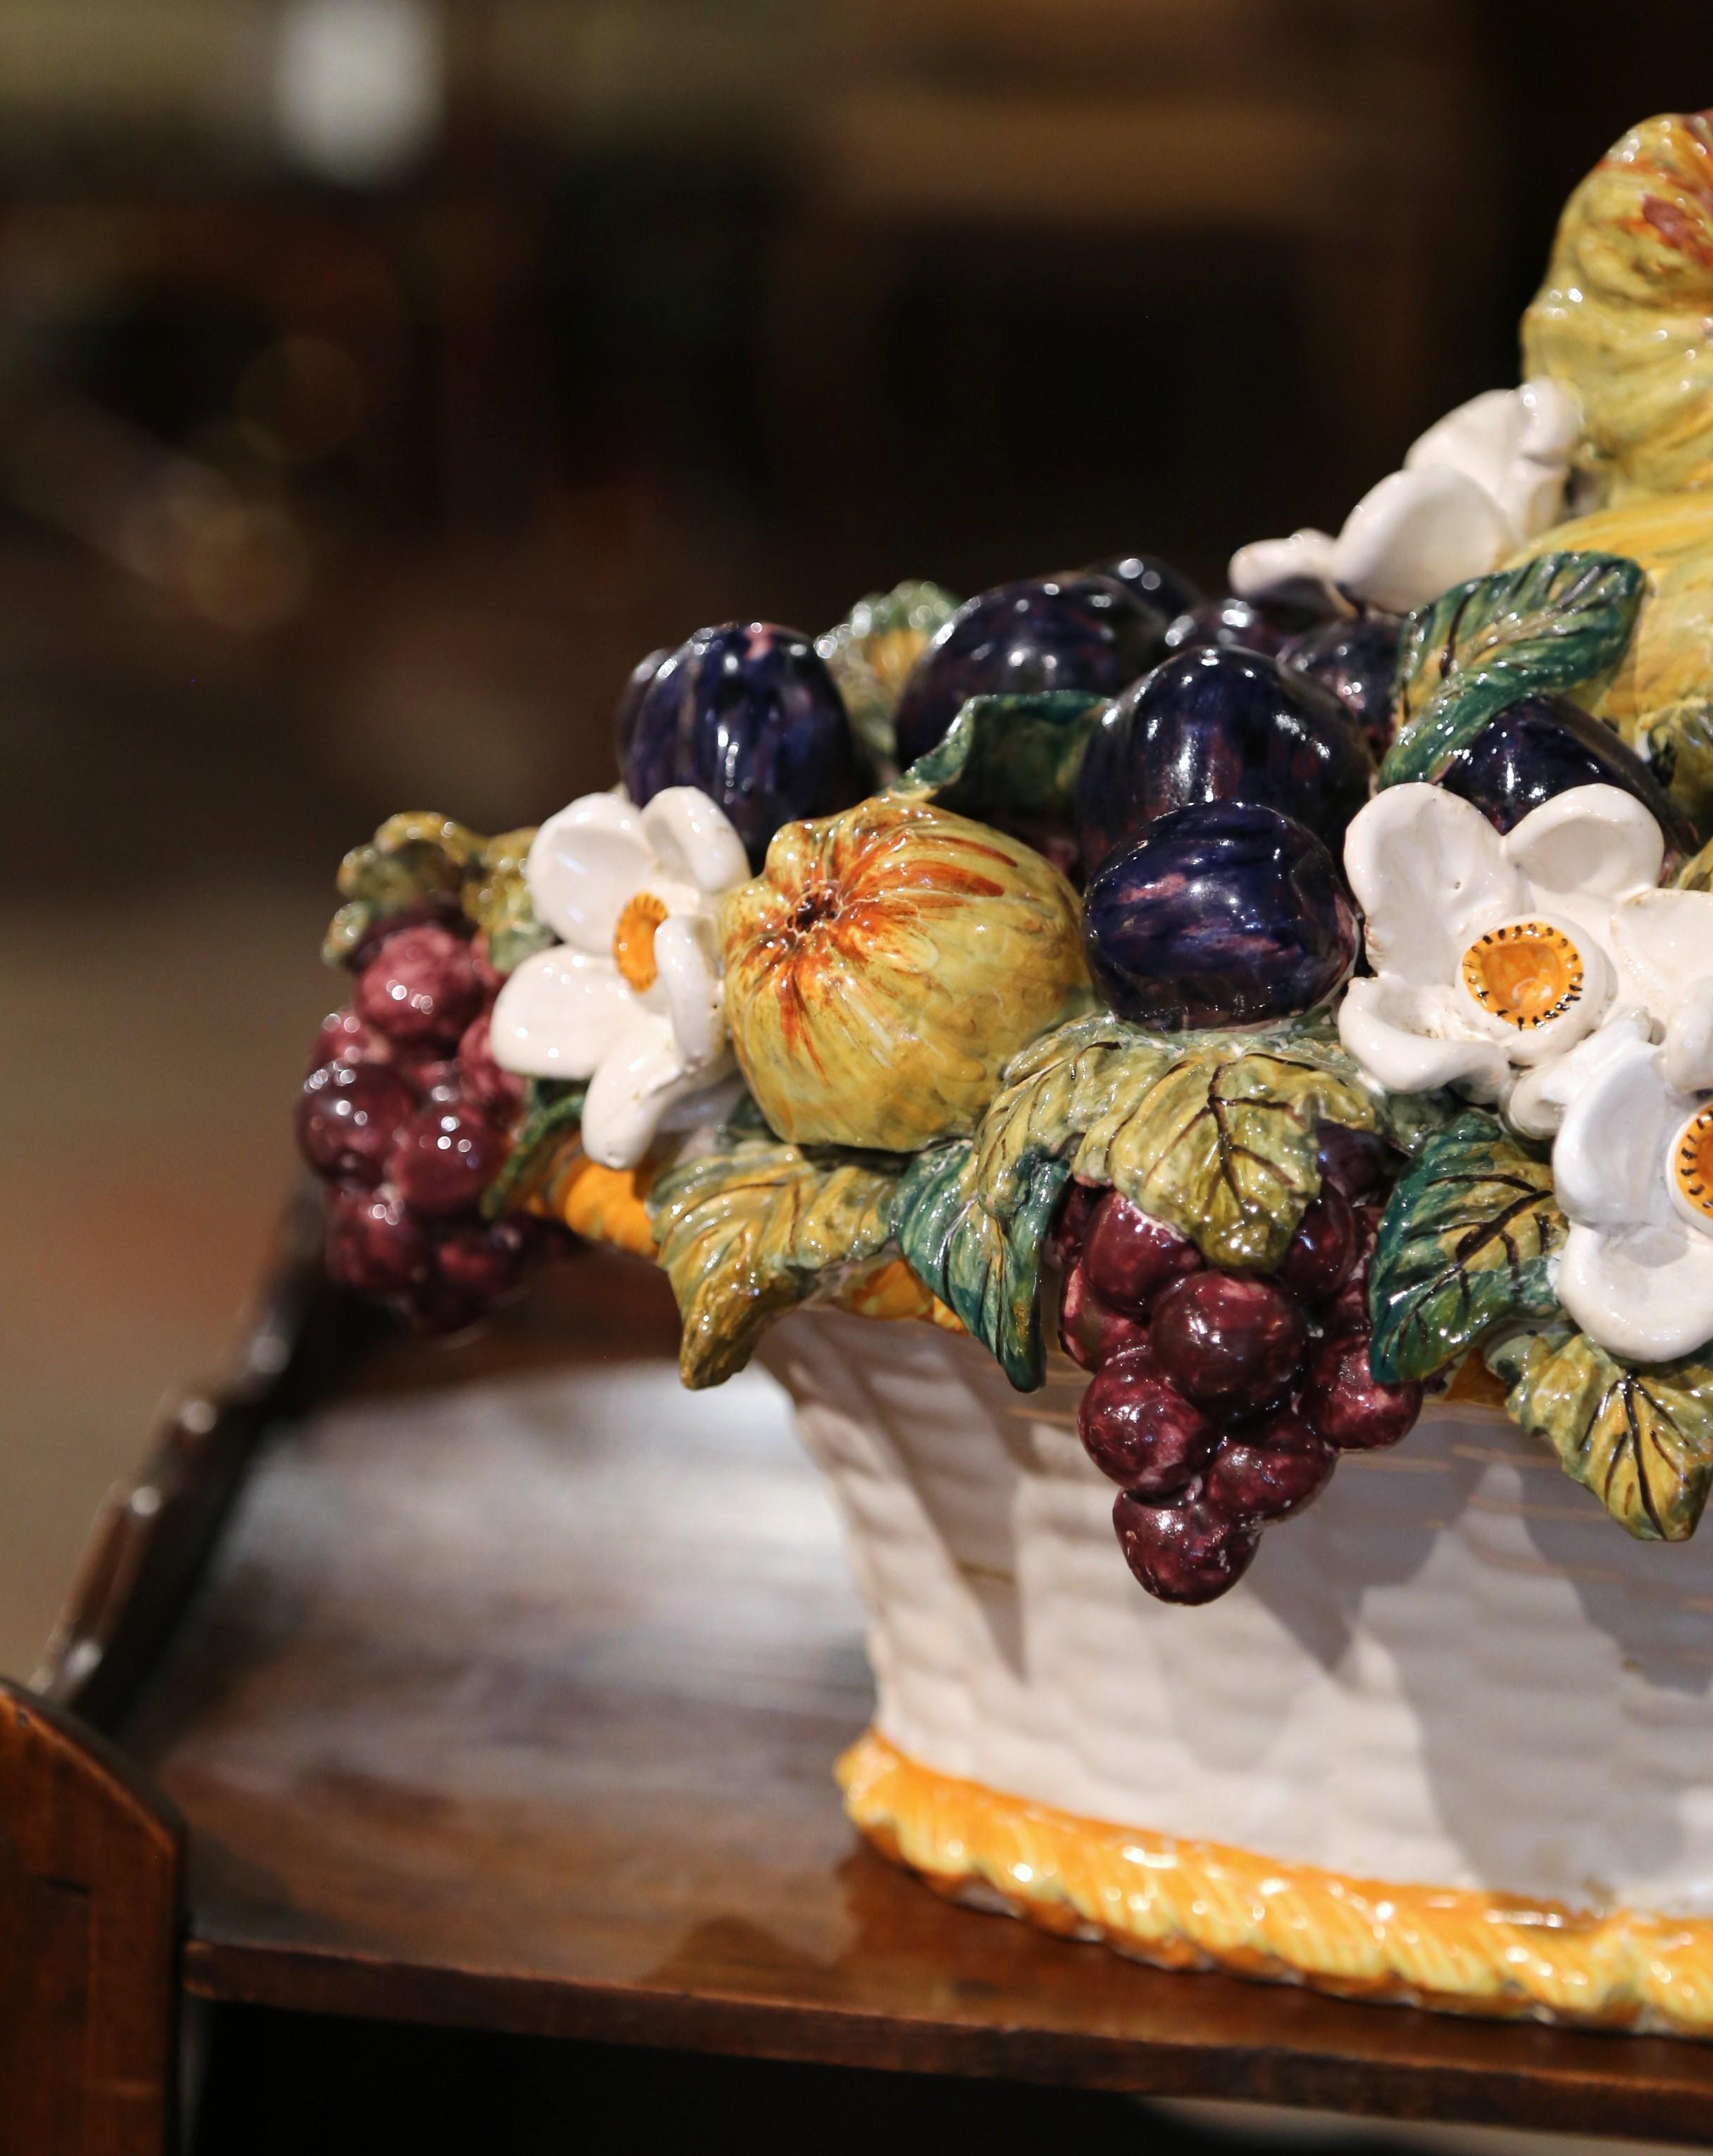 Decorate a tabletop with this colorful, majolica basket composition. Crafted in France circa 1960, the centerpiece features a realistic assortment of fruits and vegetables in high relief set inside a white basket decorated with a weave motif. The